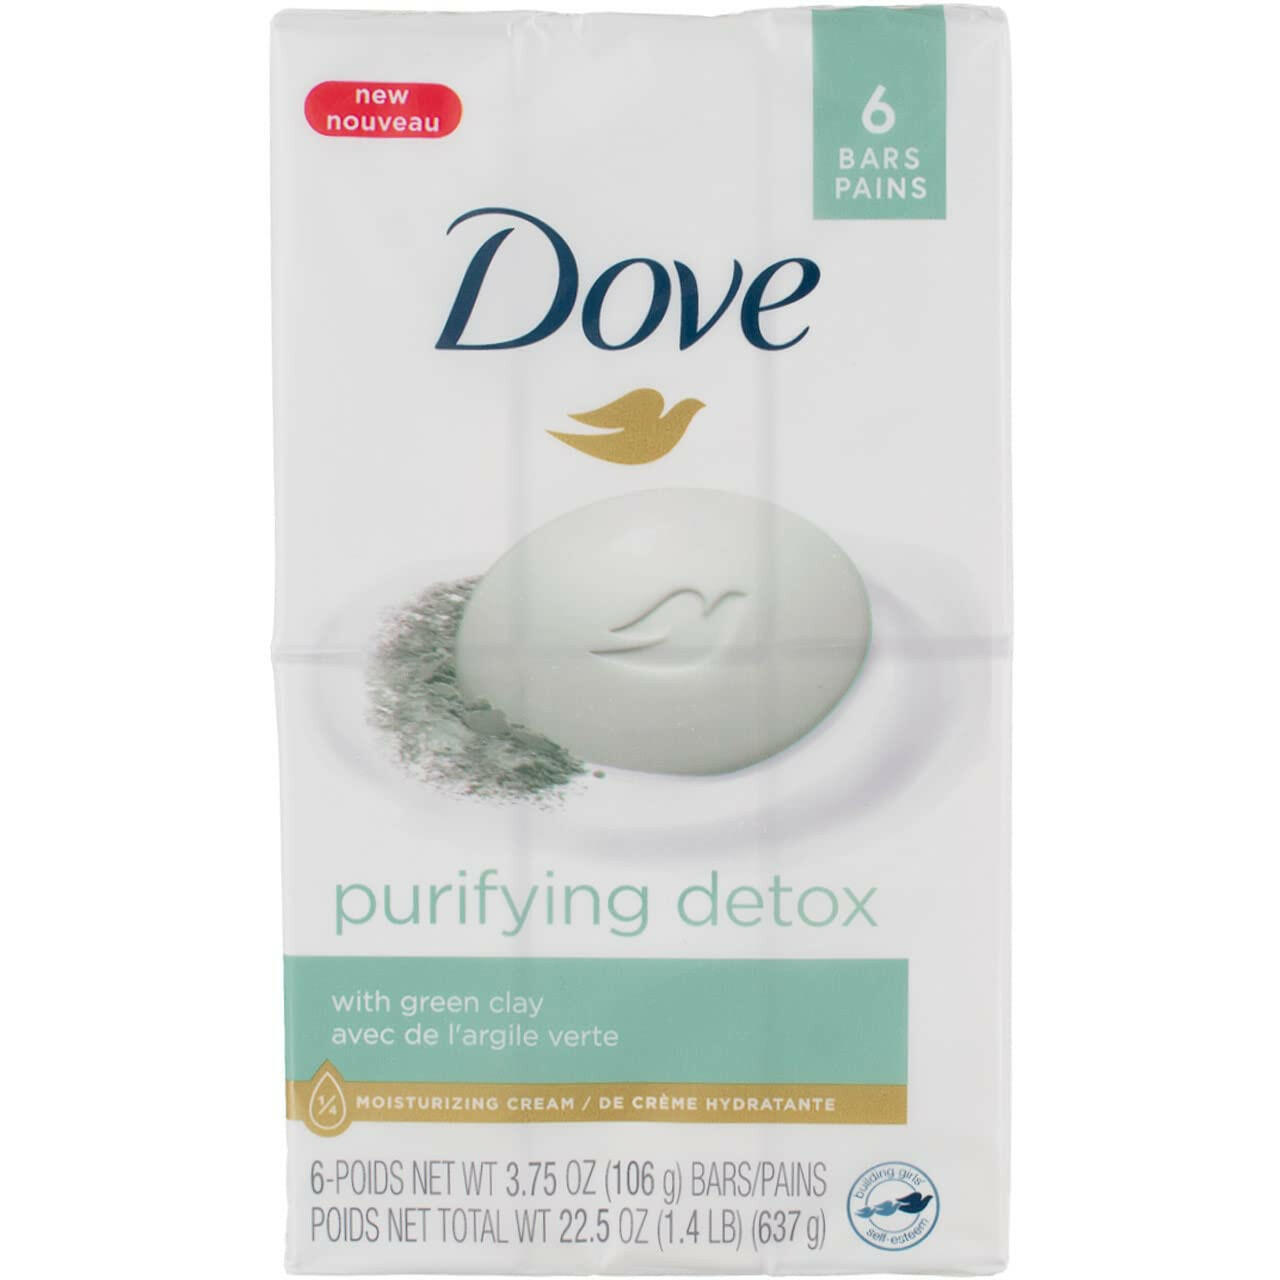 Dove Detox Purifying with green clay Bar Soap, 3.75 oz., 6 CT.